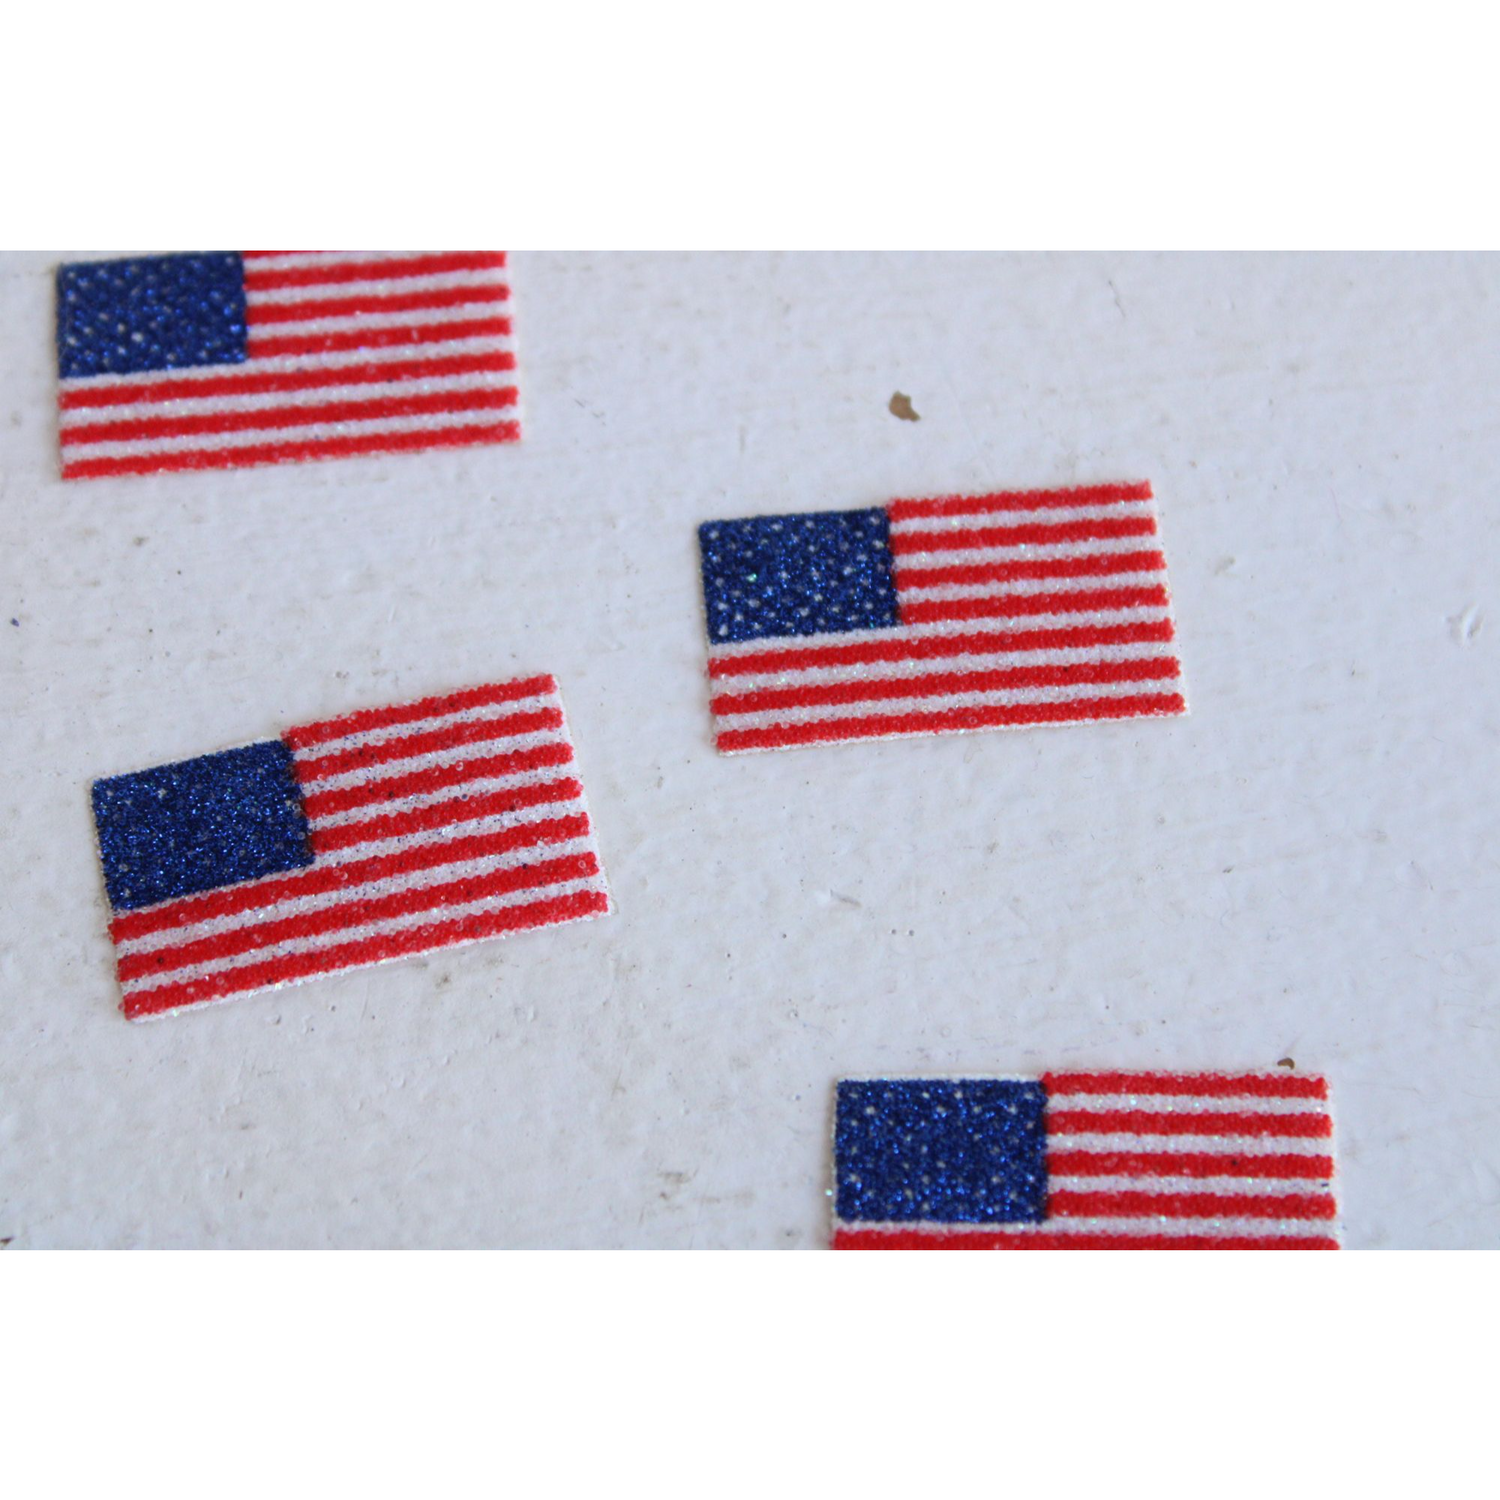 Vintage Flag Patches / American Flag Iron On 1.25 Wide